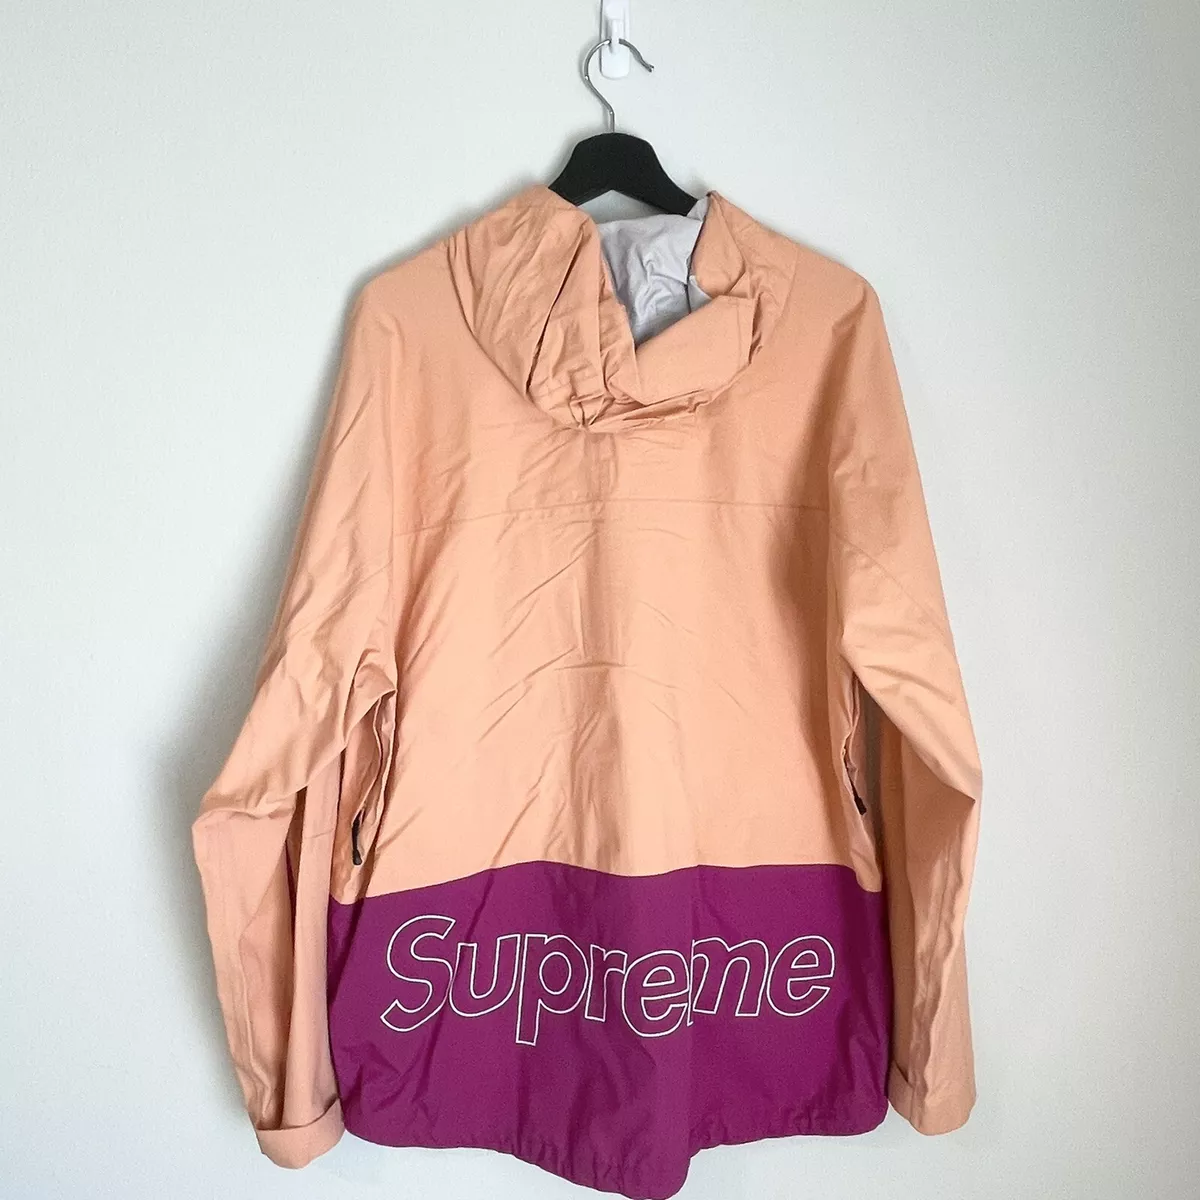 SS2017 Supreme Taped Seam Jacket Light Coral Salmon Pink Mens Size